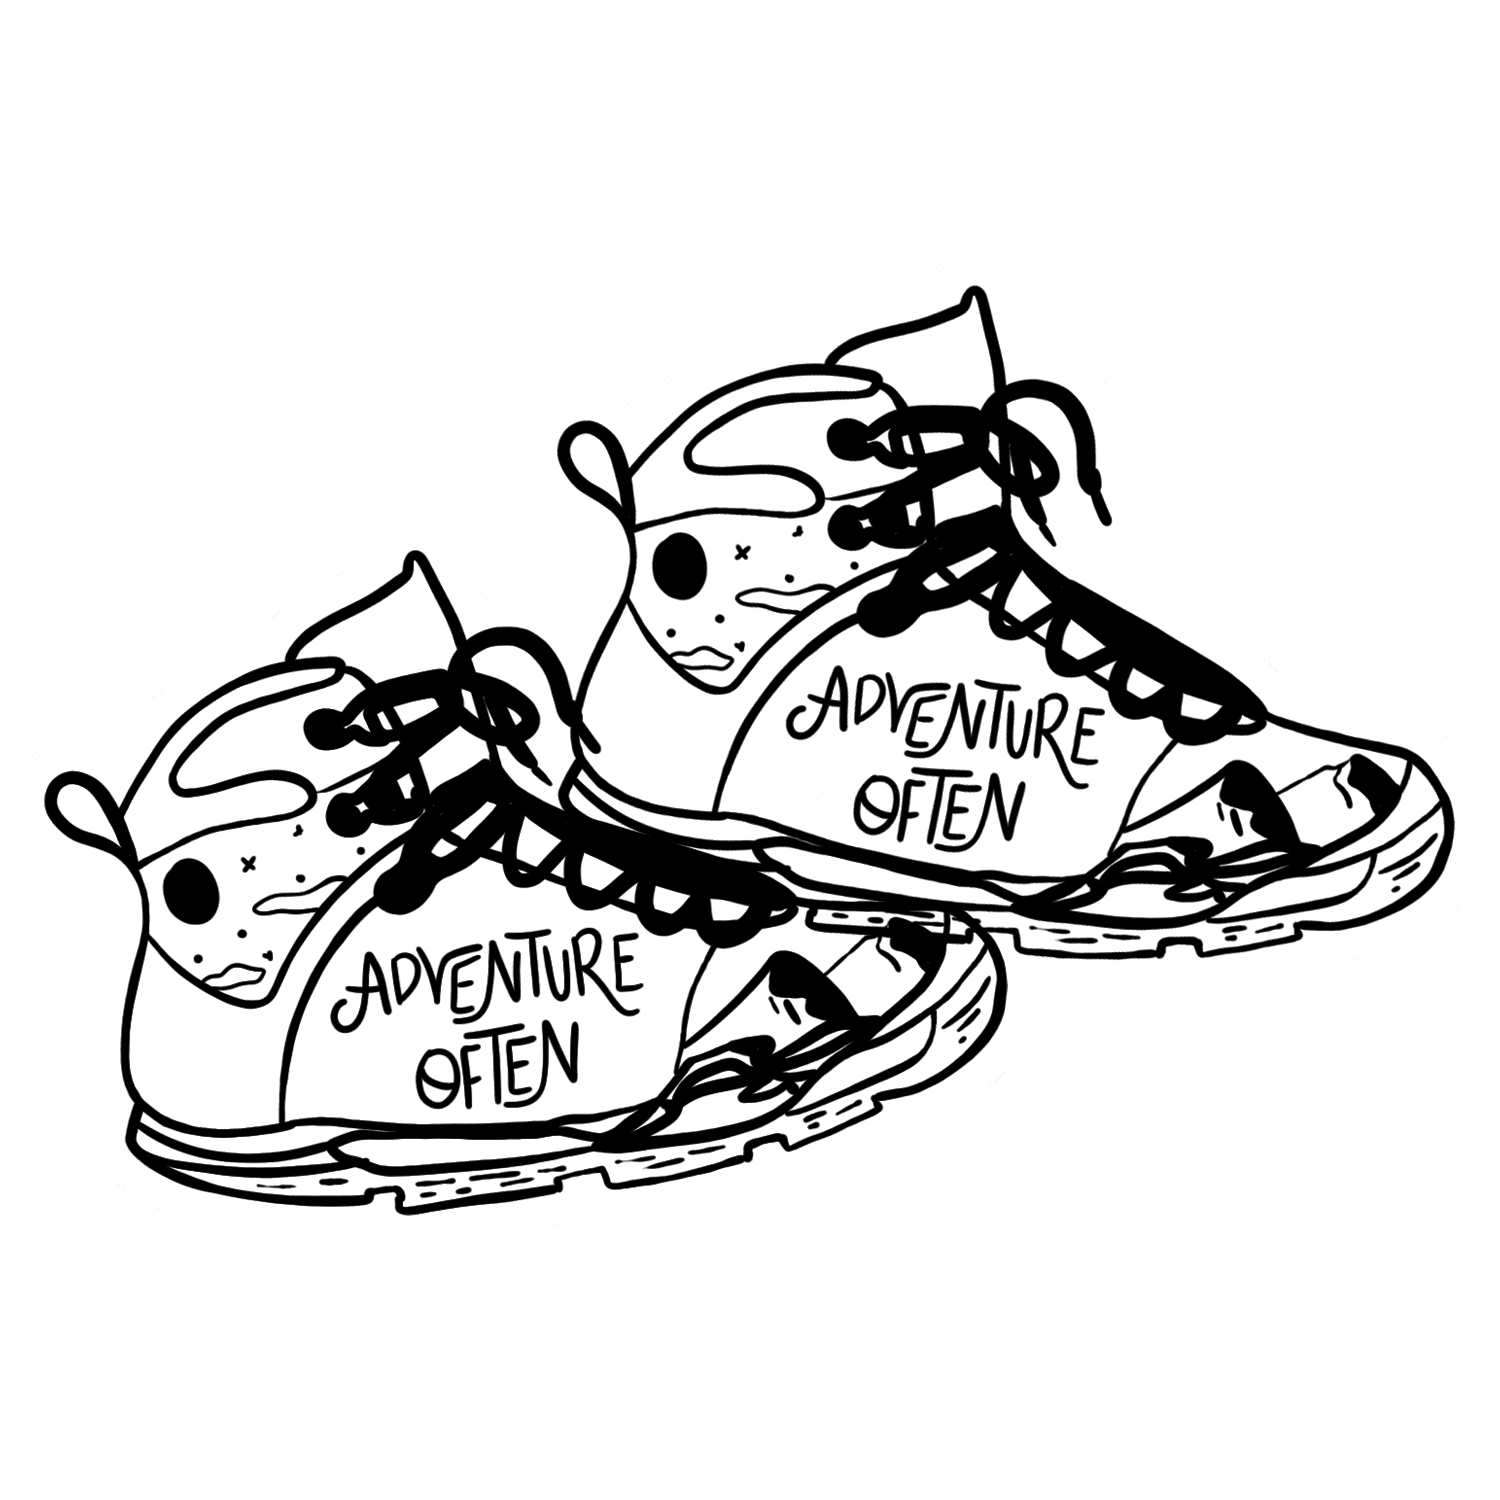 Adventure often Holographic Stickers | STICK IT UP